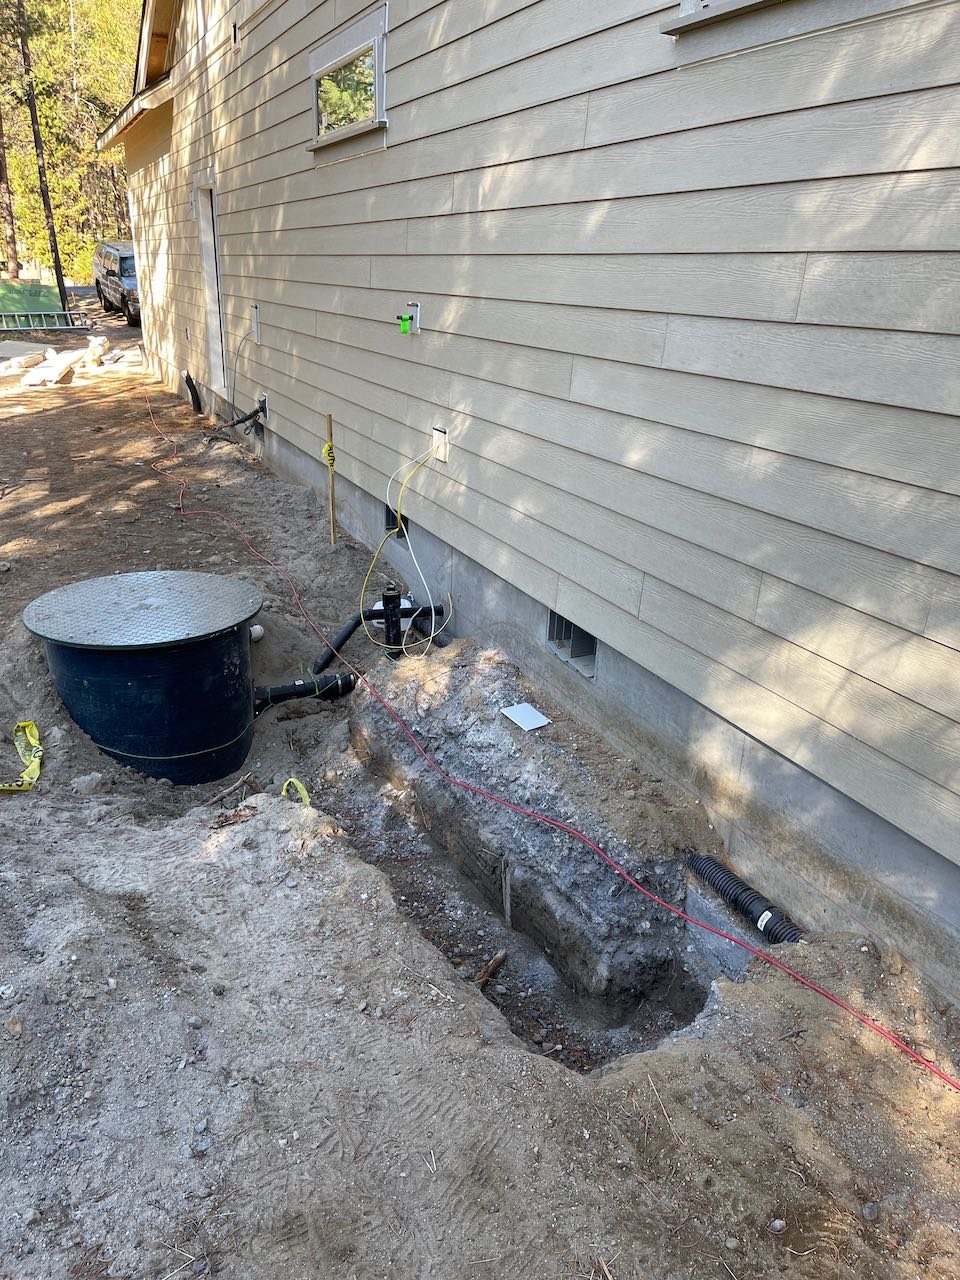 Sewer grinder close to house